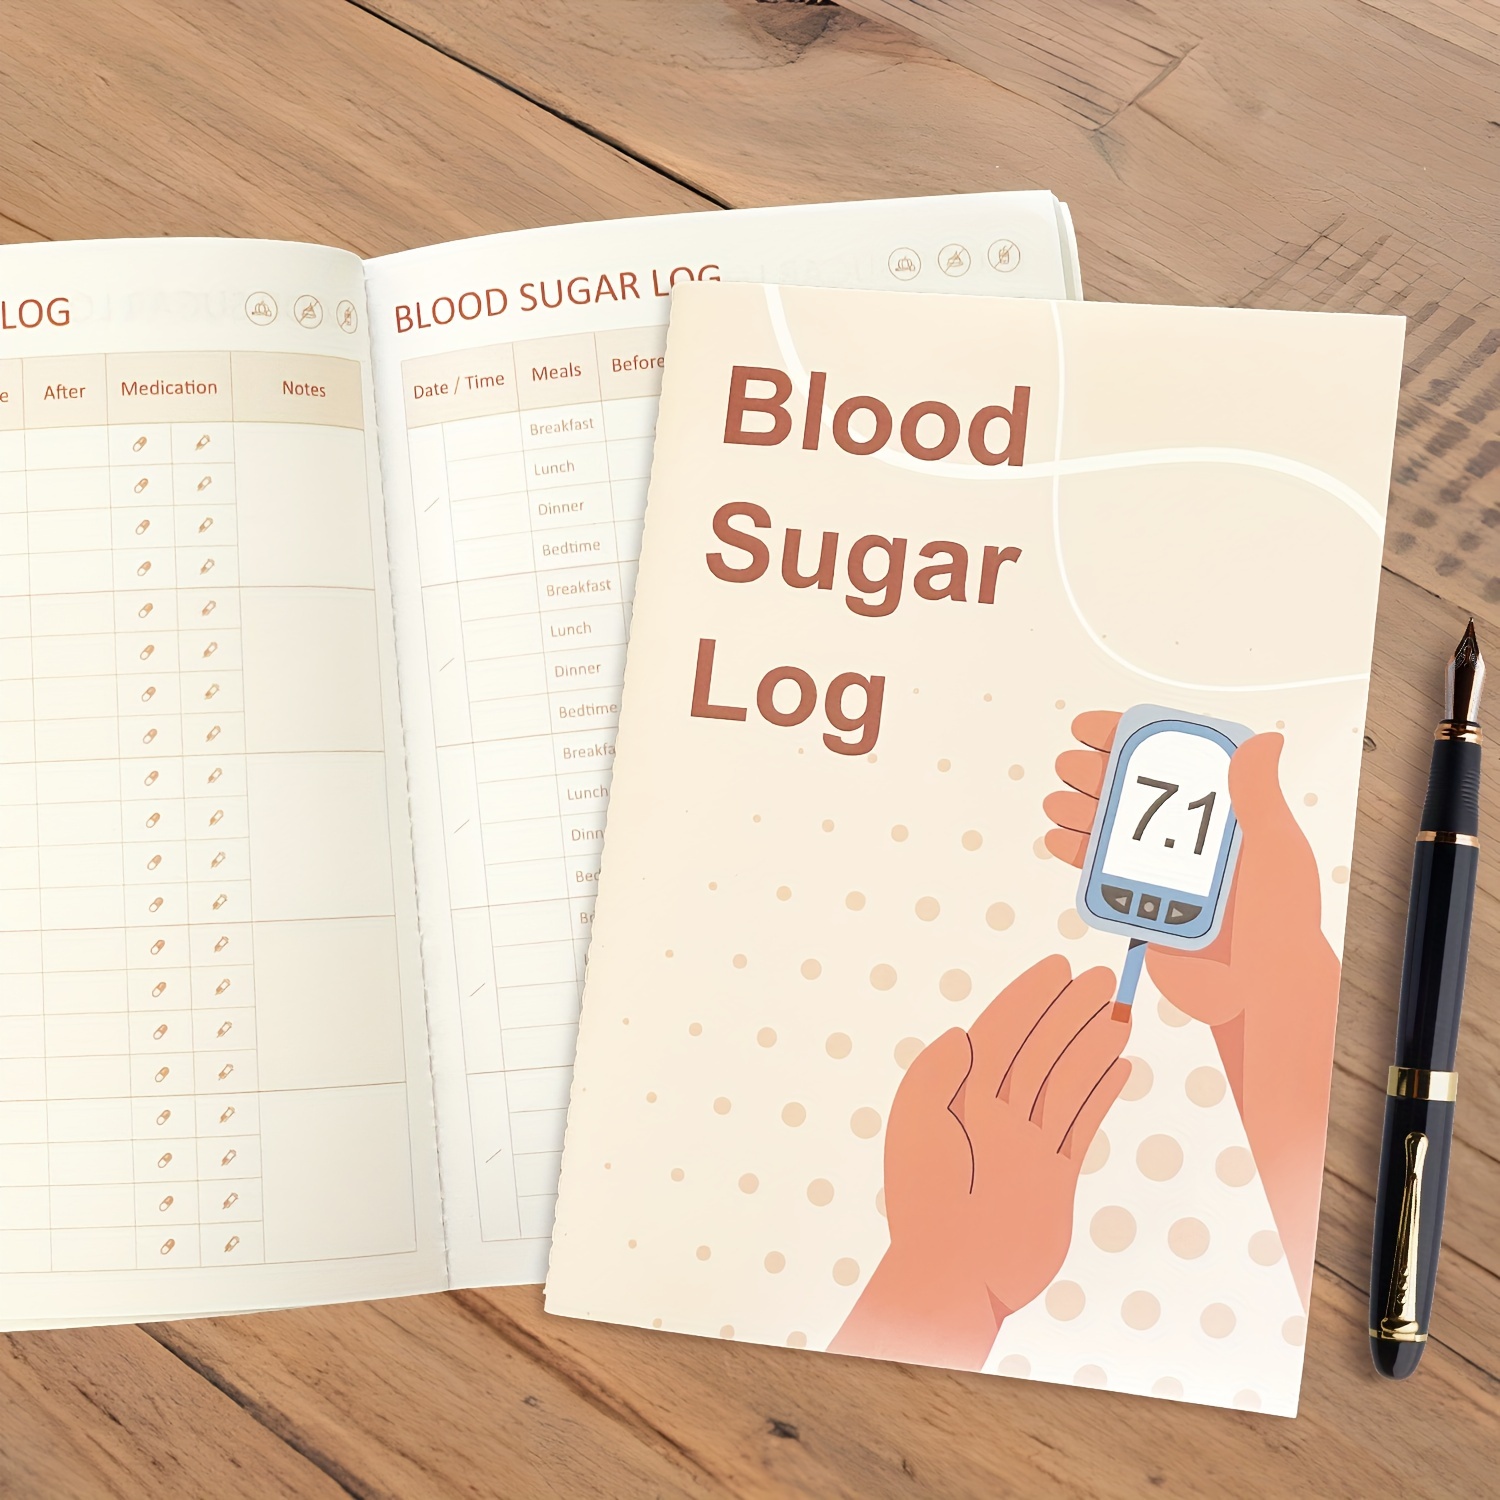 

Blood Sugar Log: Daily Record And Tracking Of Glucose And Medication - A5 (8.6x5.9 Inches) - Health Diary, Glucose Tracking Notebook